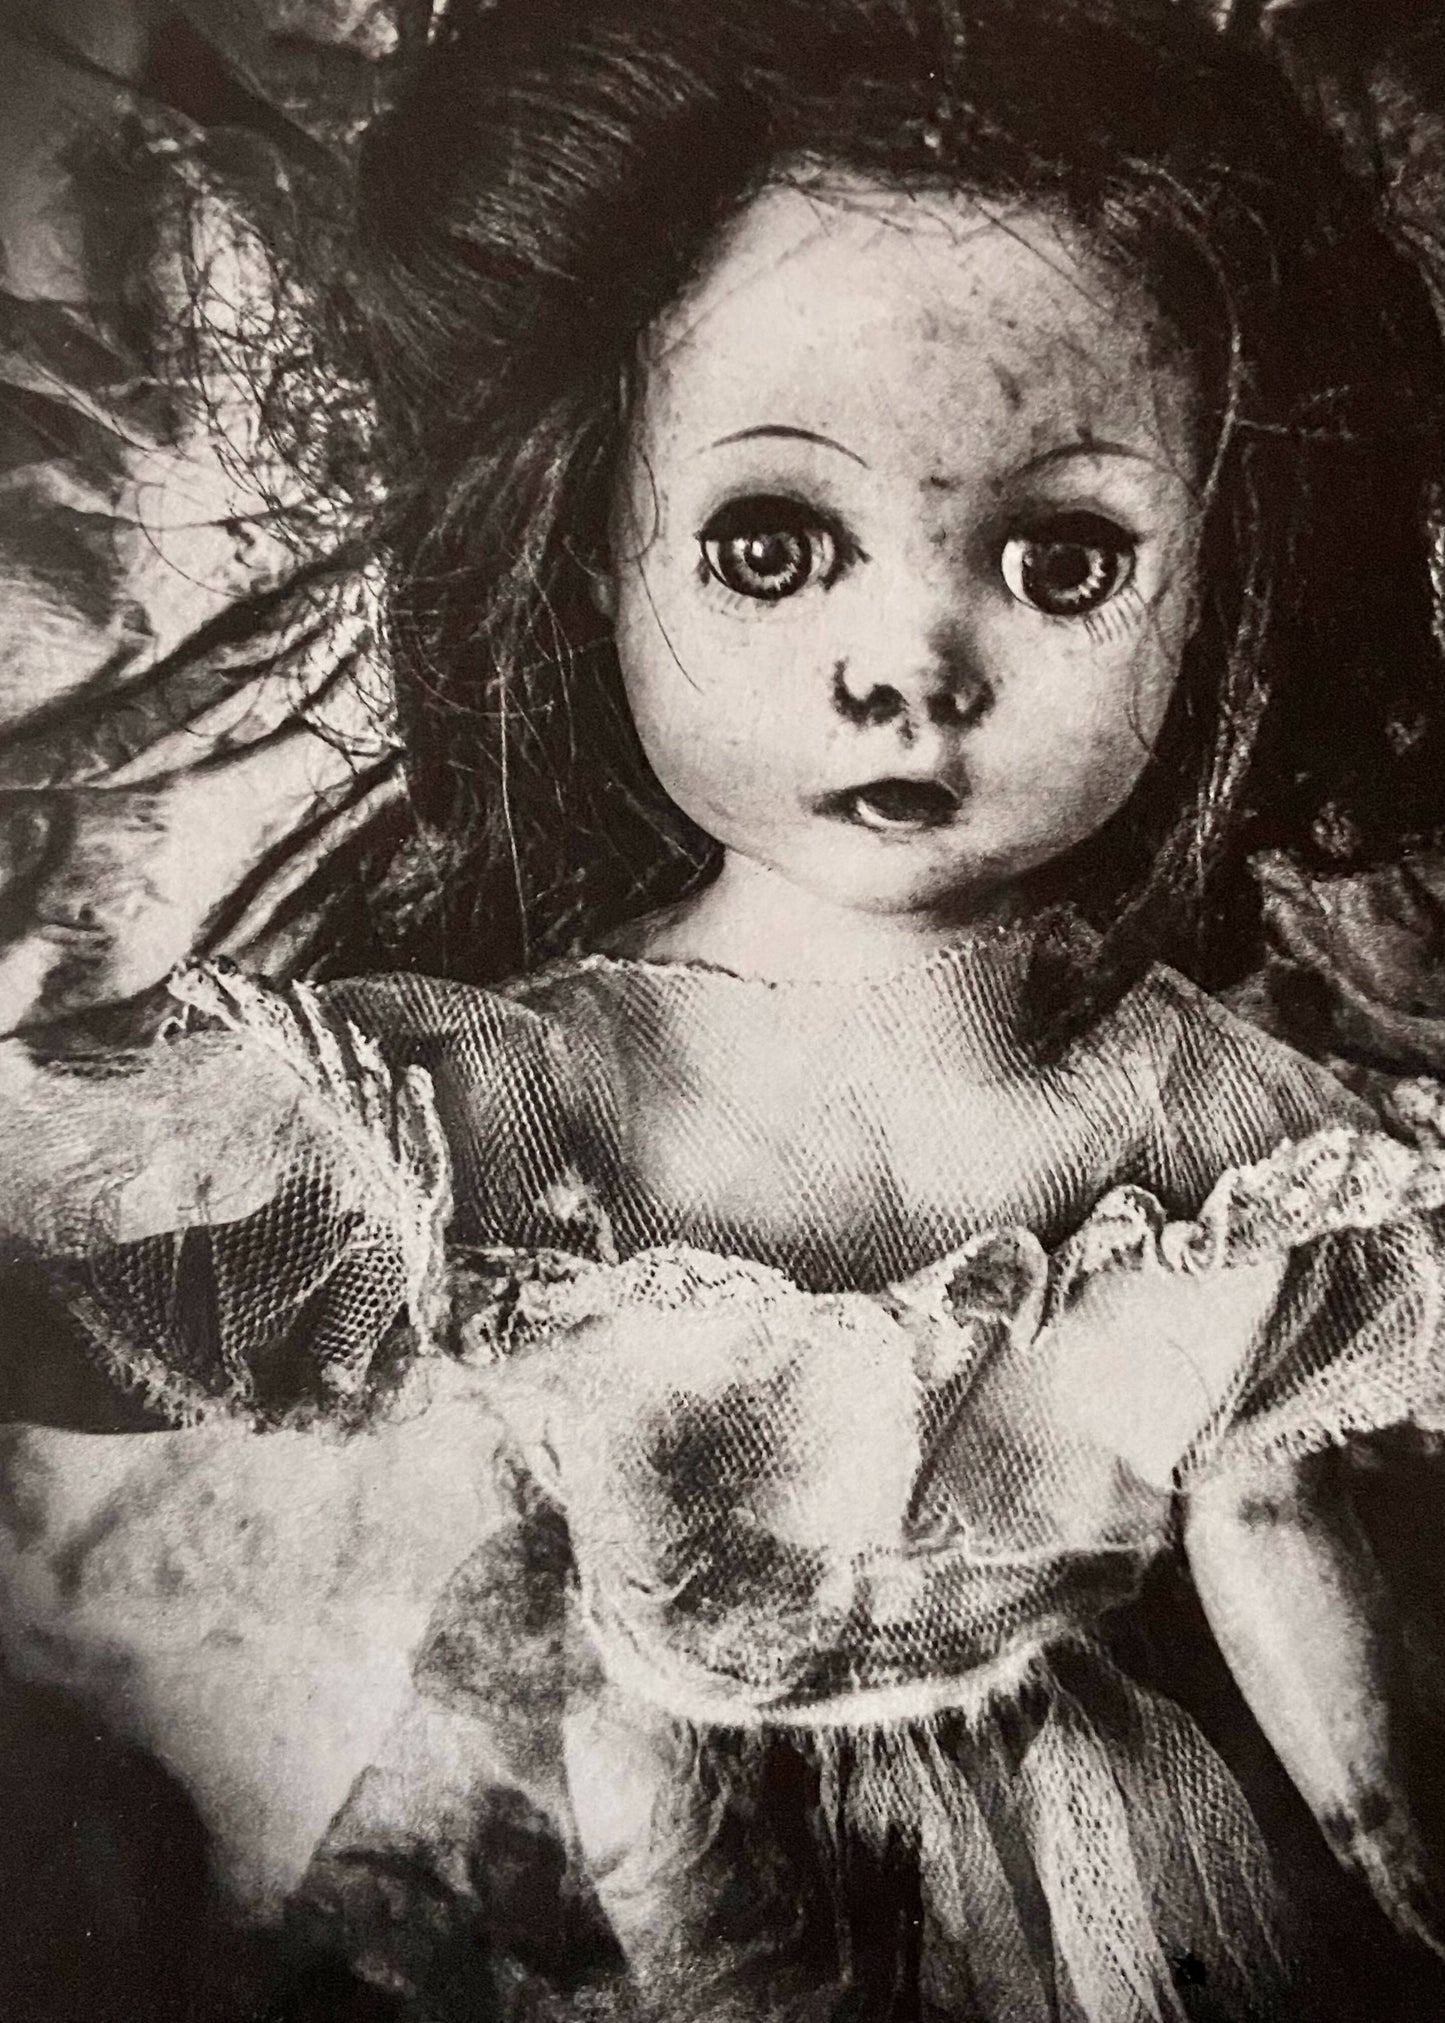 Untitled (Doll Series/Photopolymer Gravure Print)